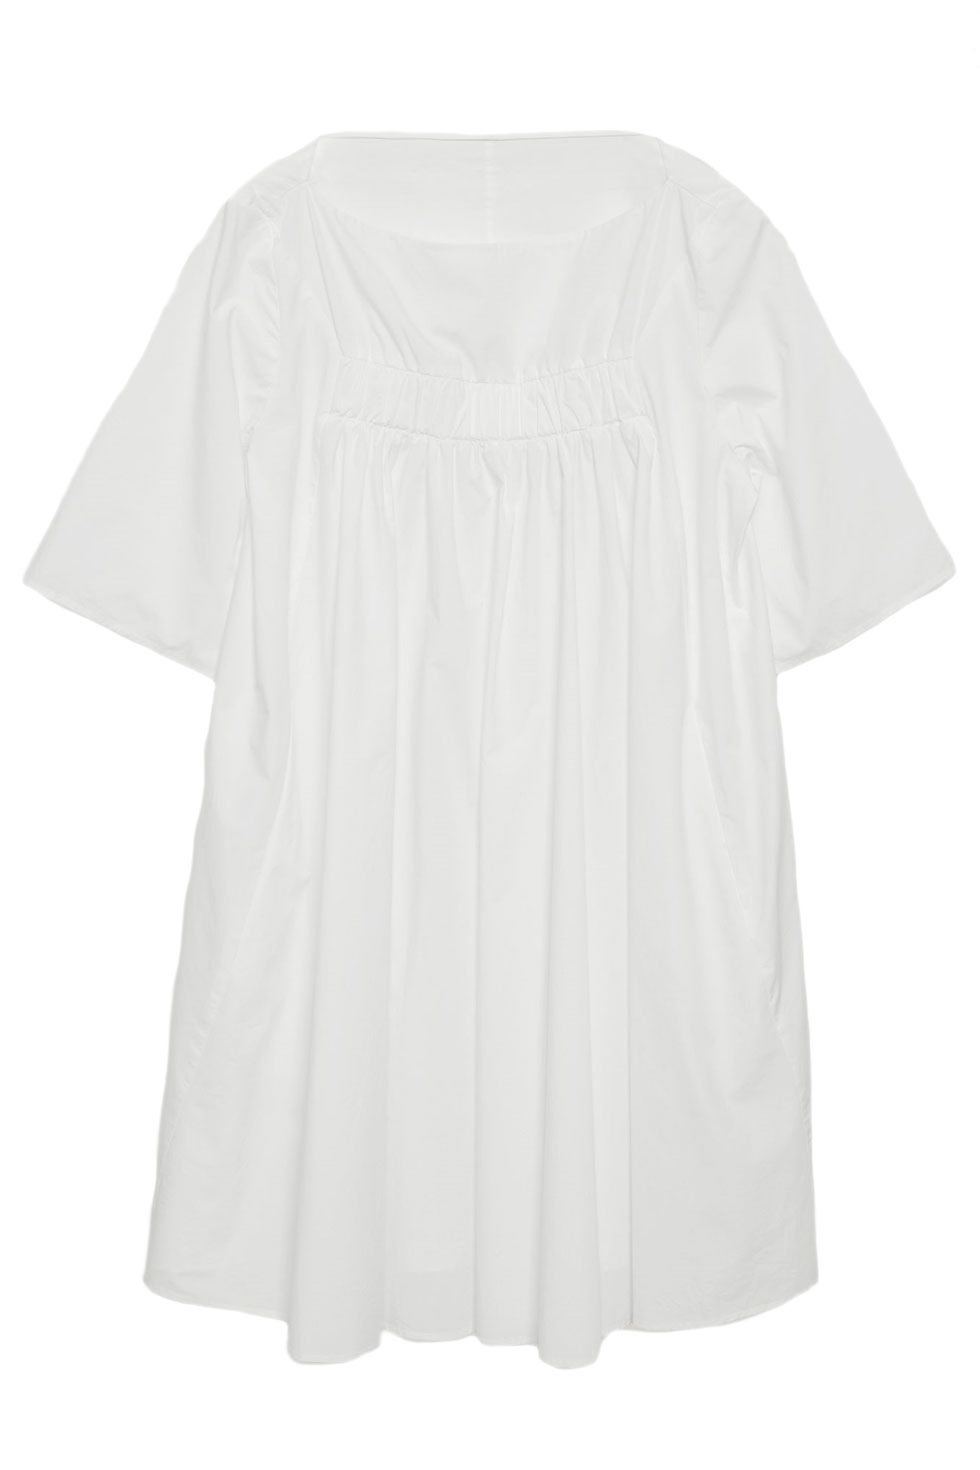 <p>
Cos Dress with Gathered Front, $99; <a href="http://www.cosstores.com/us/Women/Dresses/Dress_with_gathered_front/46881-25404344.1#c-15133331">cosstores.com</a></p><p><span class="redactor-invisible-space" data-verified="redactor" data-redactor-tag="span" data-redactor-class="redactor-invisible-space"></span></p>